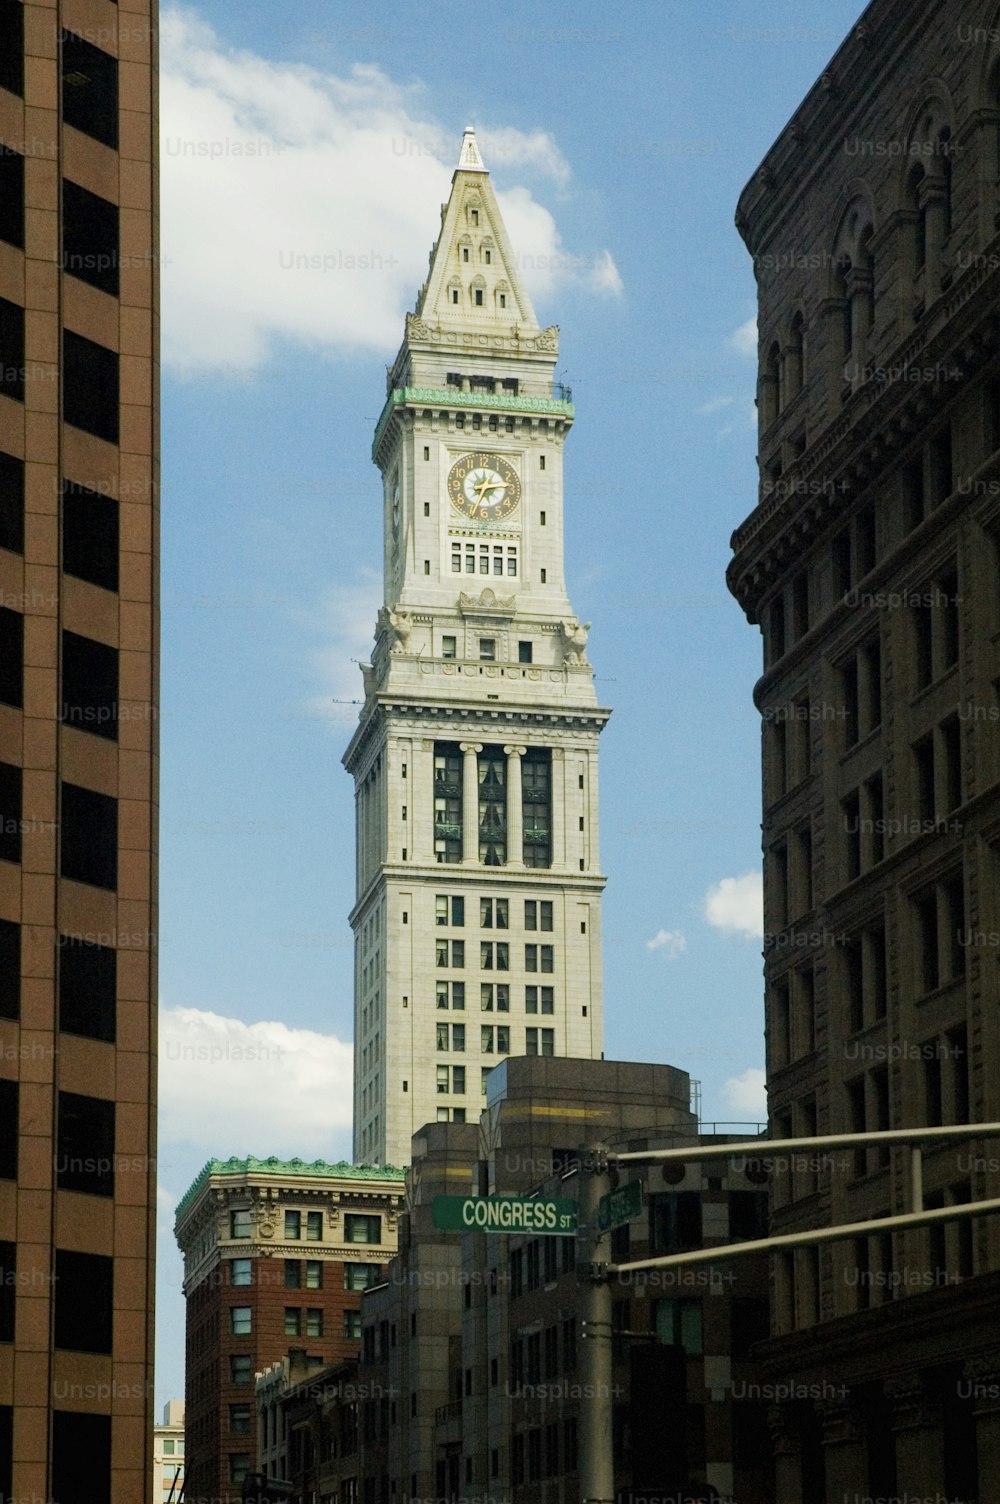 a tall white clock tower towering over a city